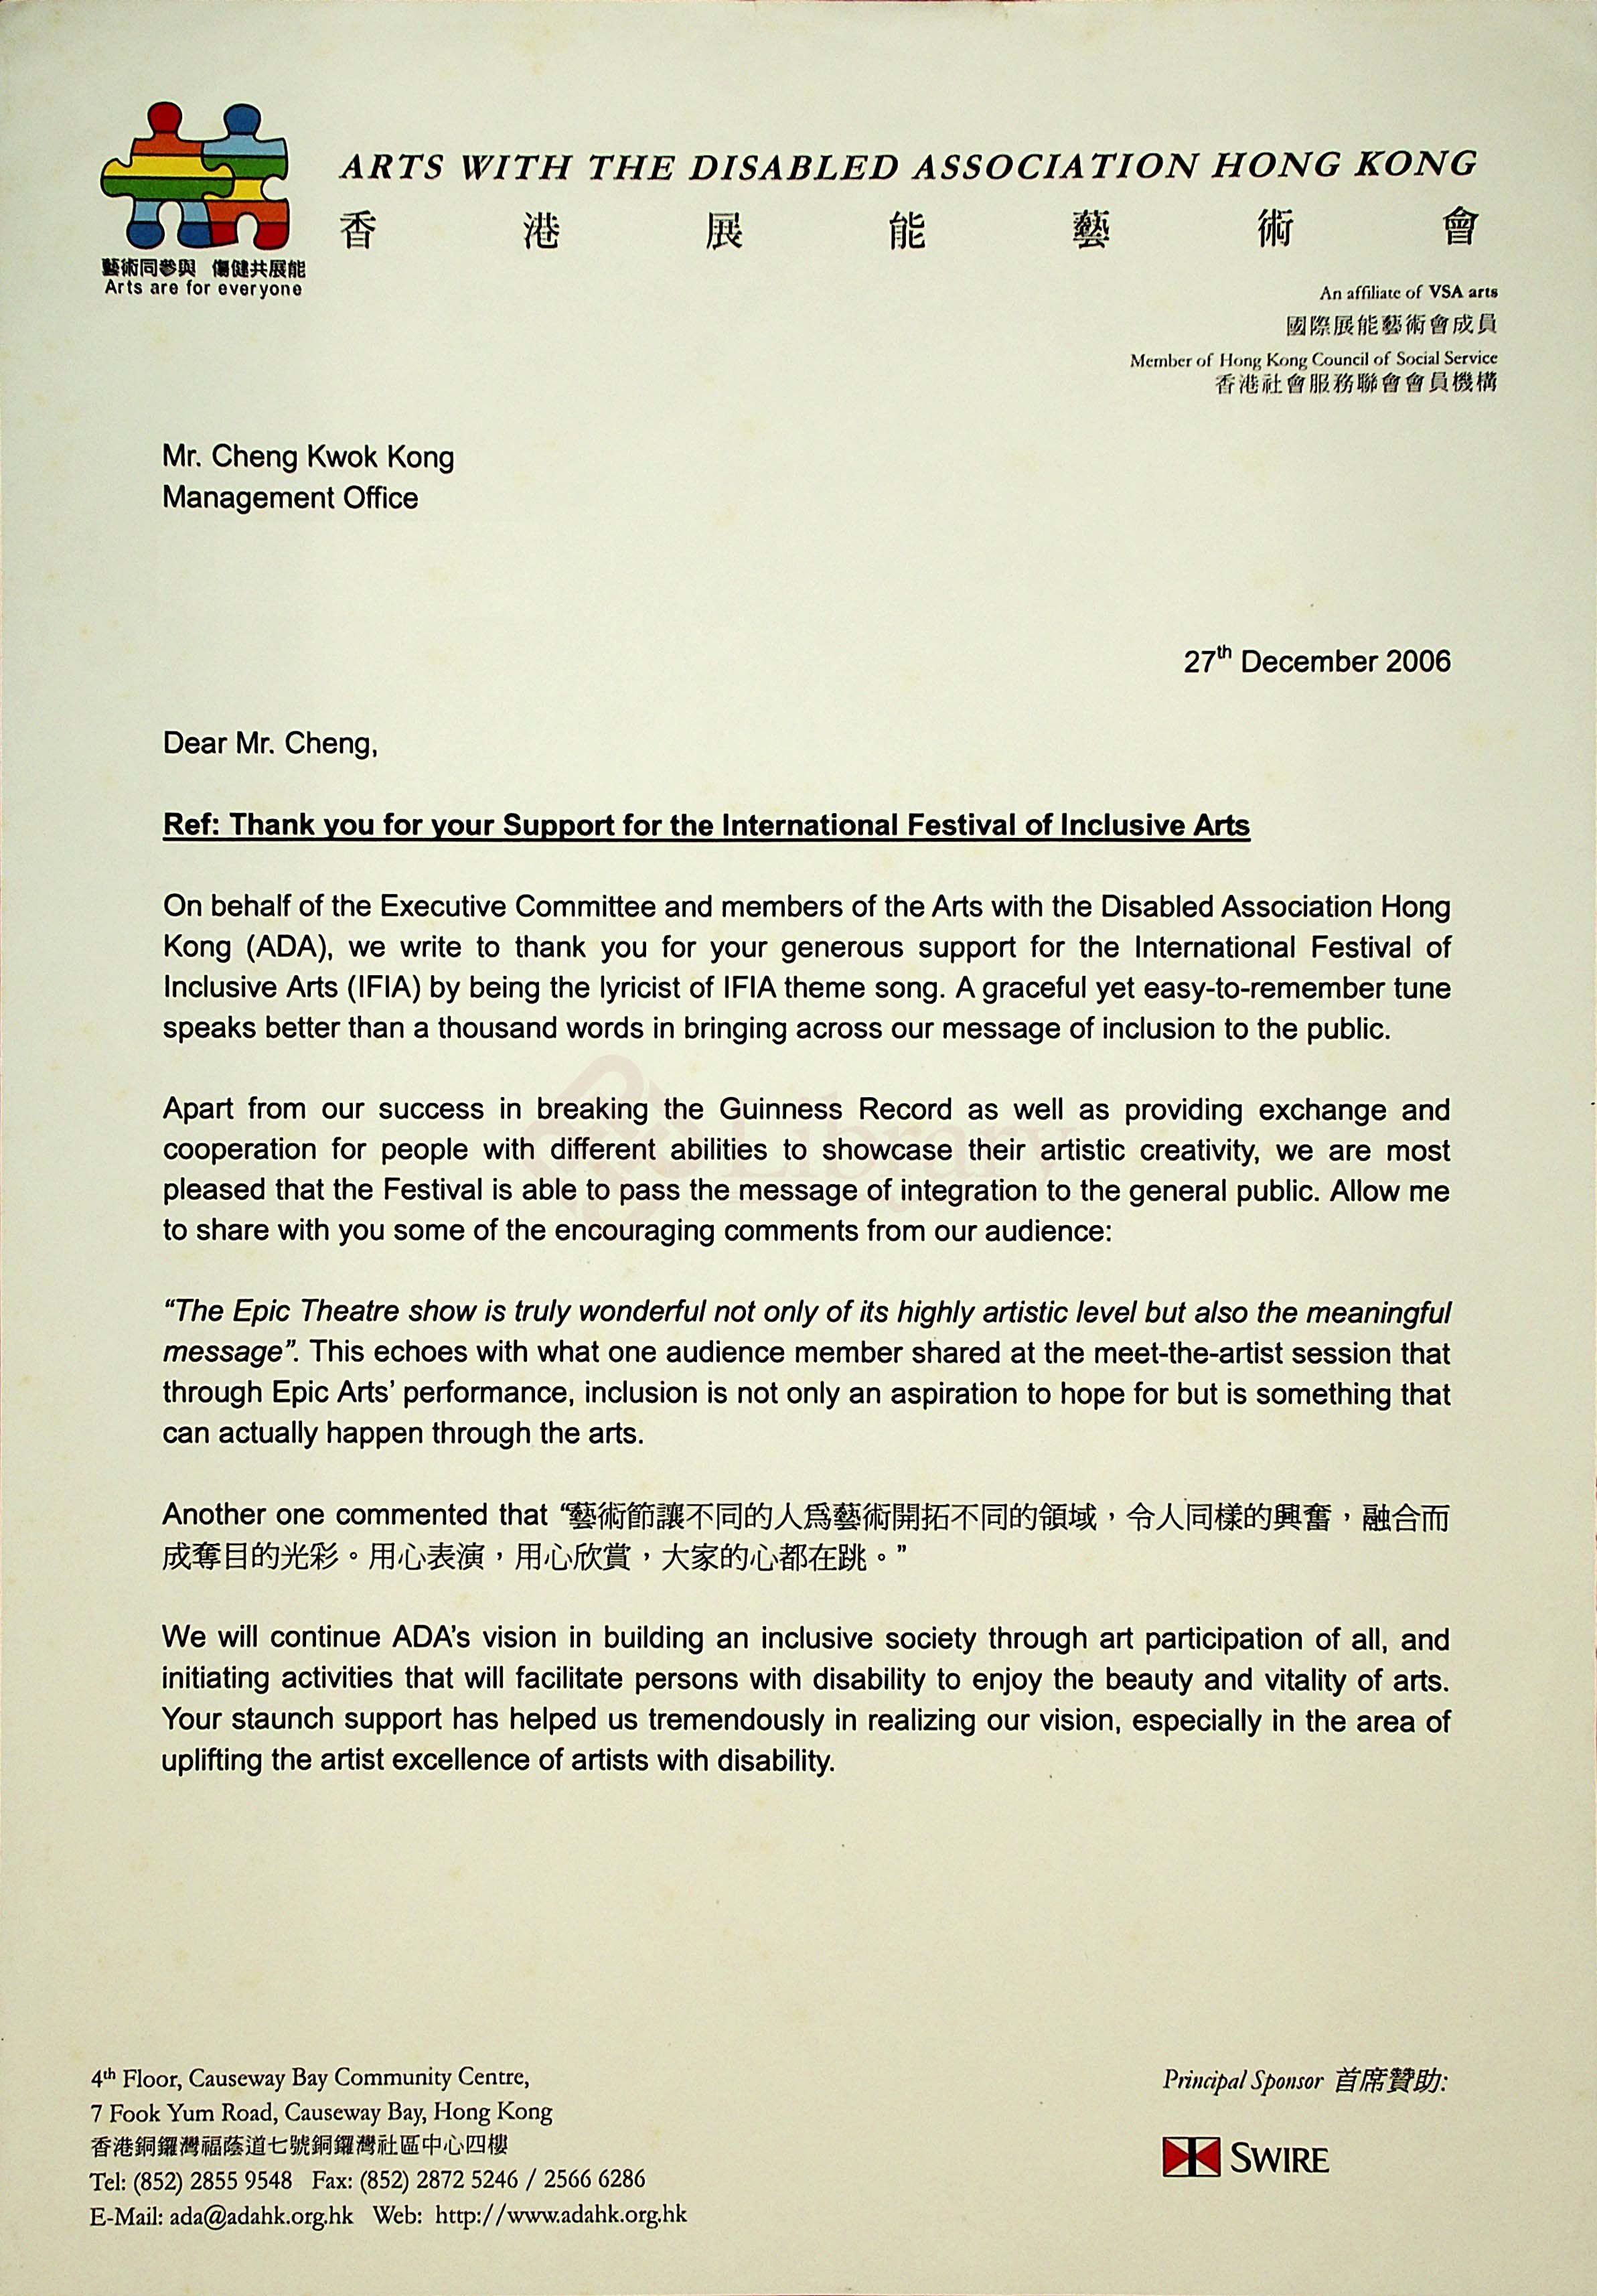 Thank You Letter from the Arts With The Disabled Association Hong Kong to Cheng Kok-kong, 27th December 2006